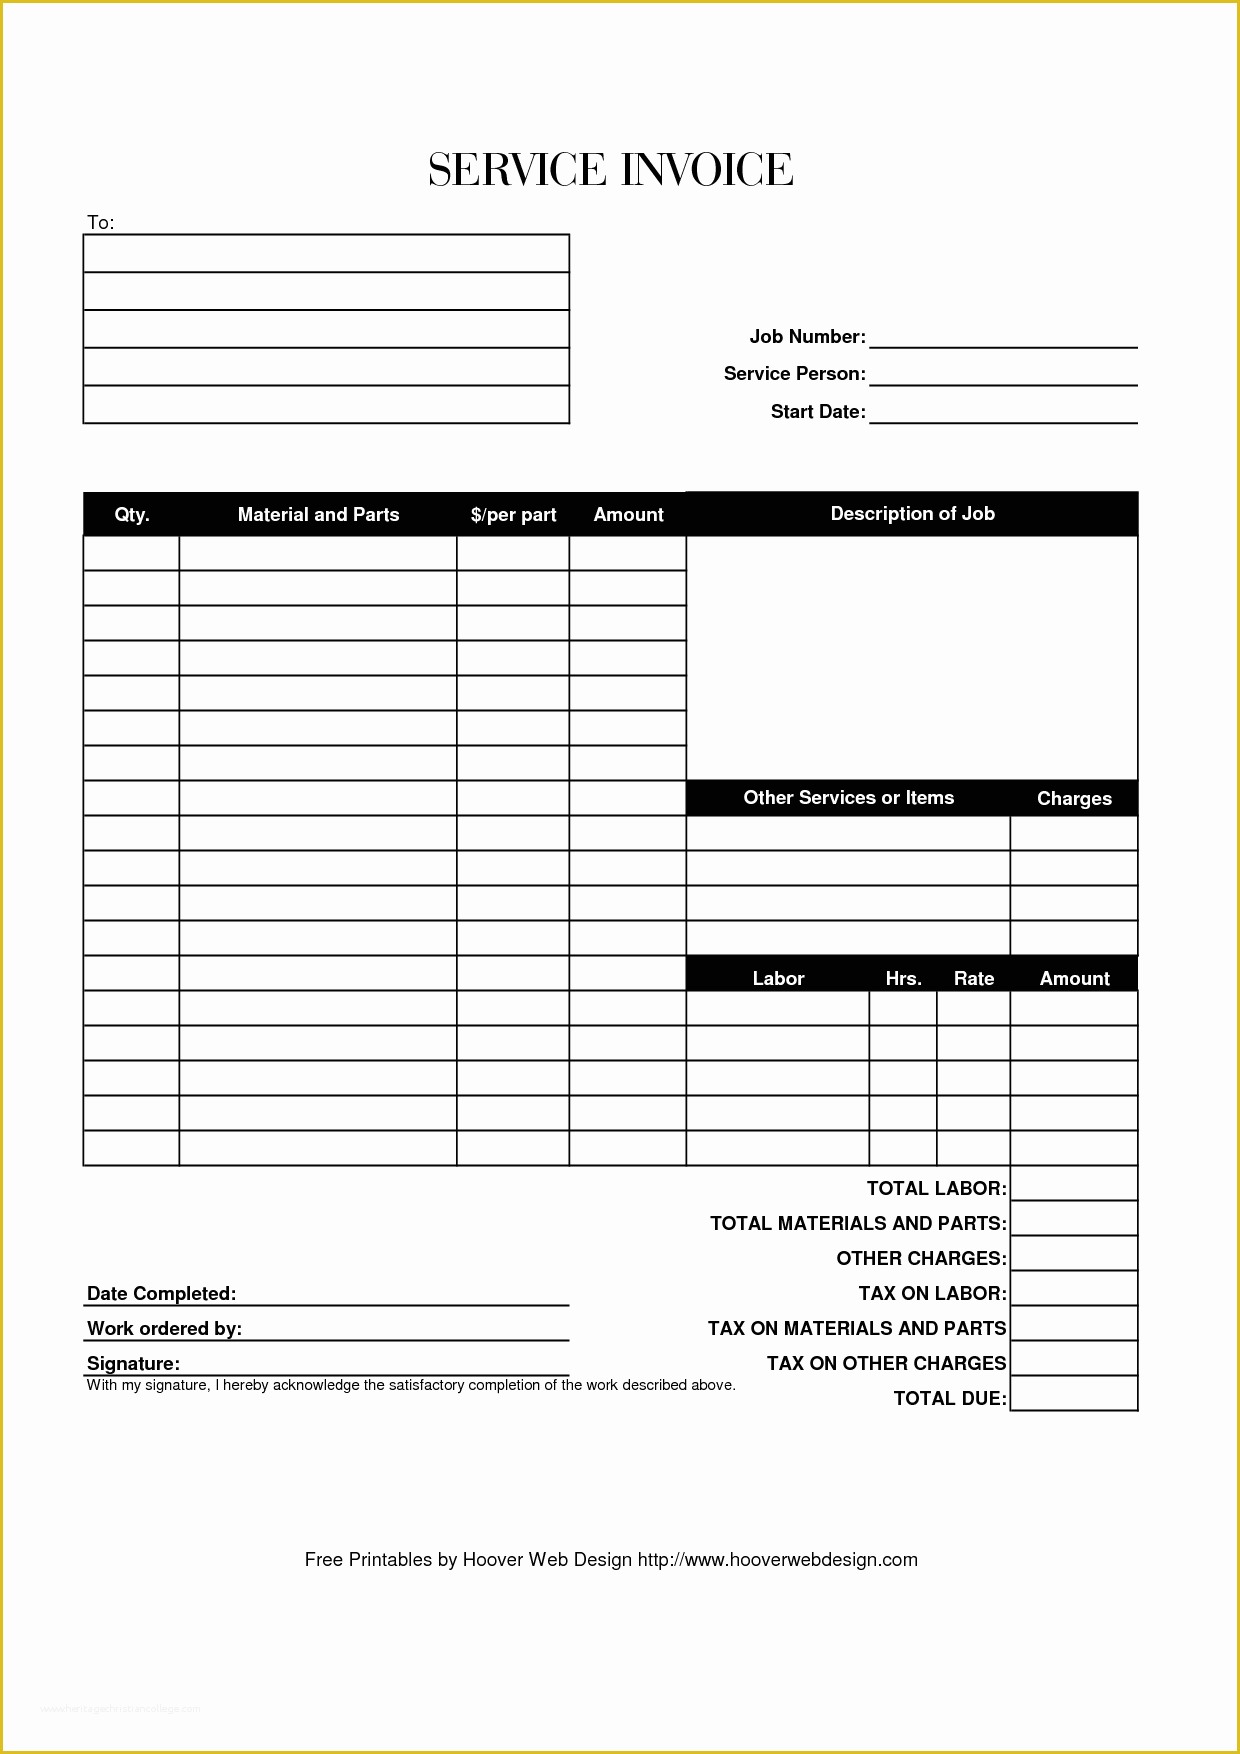 Receipt for Services Template Free Of Hoover Receipts